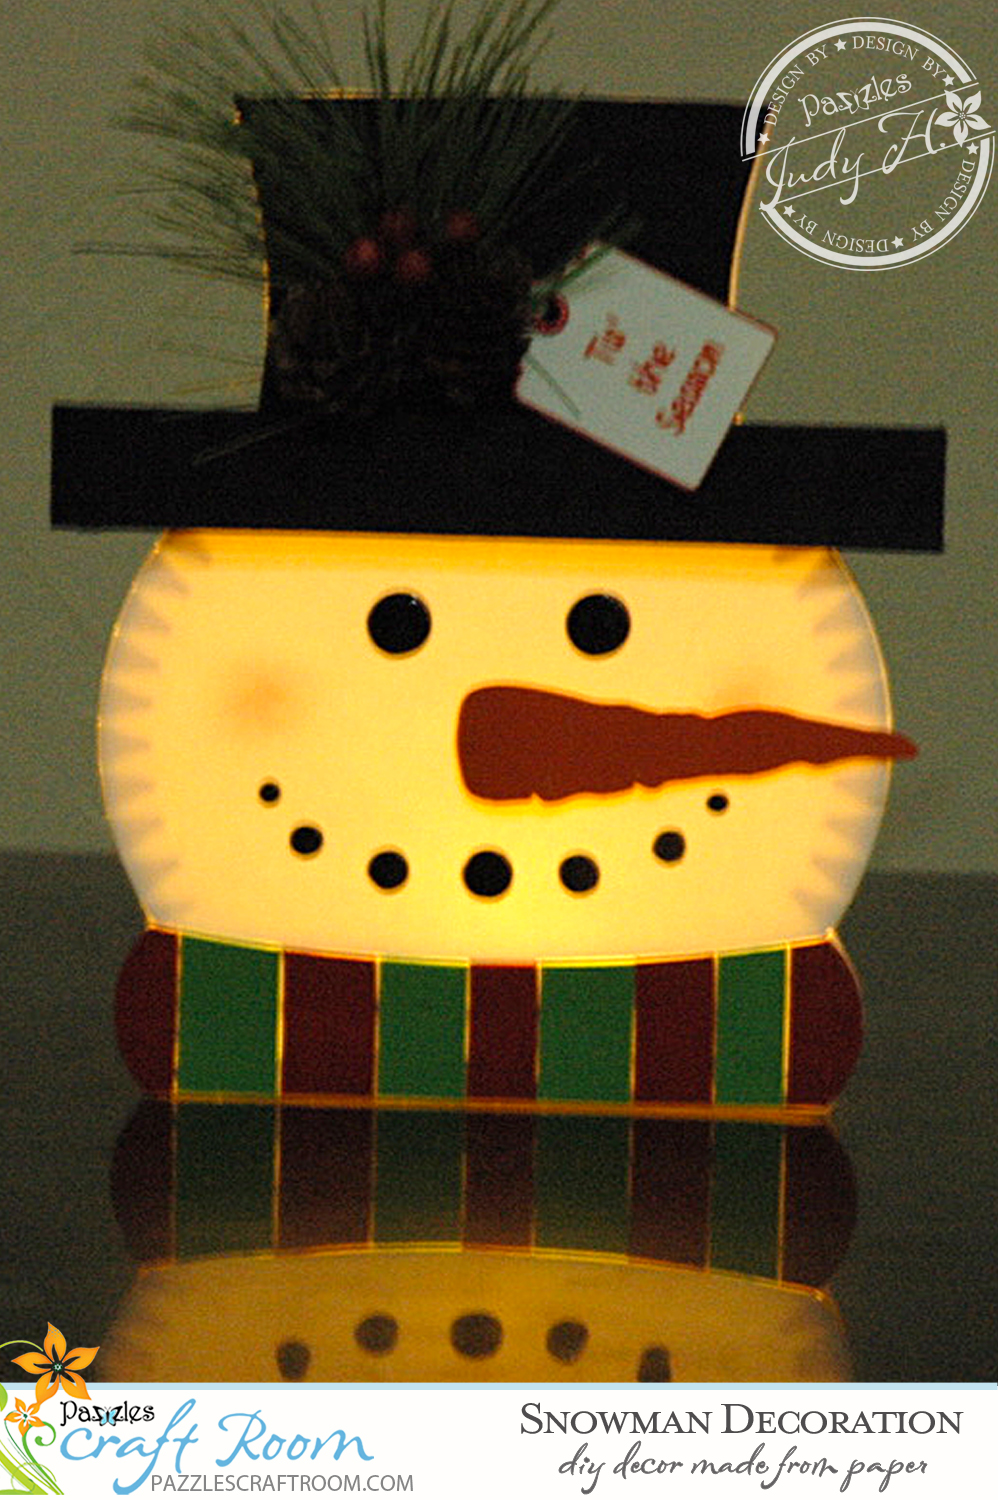 Pazzles Light Up DIY Snowman Decoration with instant SVG download. Compatible with all major electronic cutters including Pazzles Inspiration, Cricut, and Silhouette Cameo. Design by Judy Hanson. 